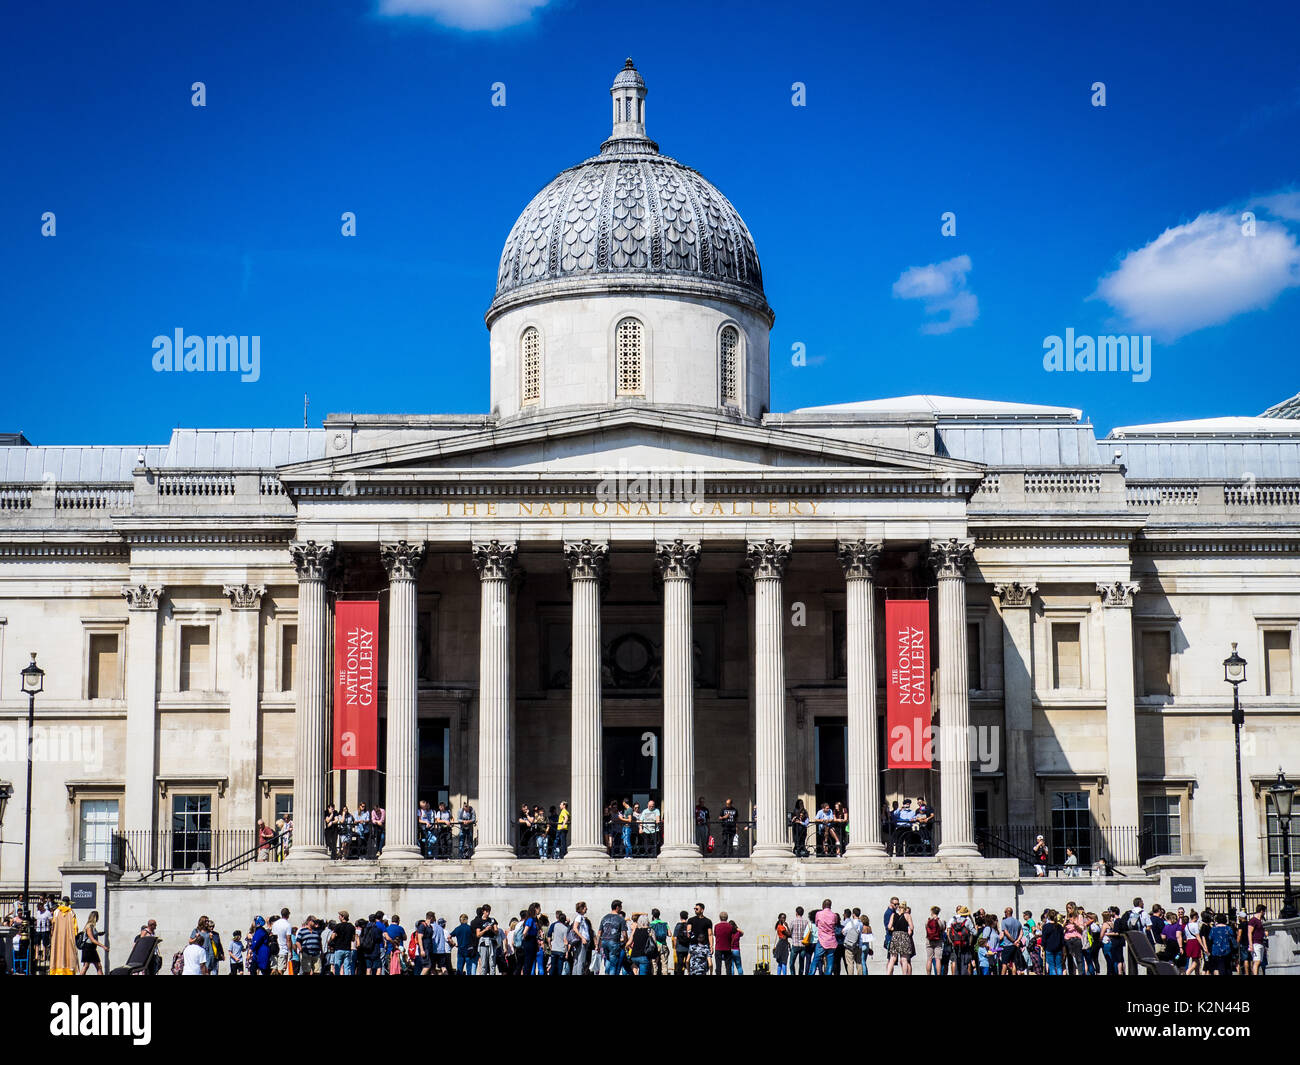 National Gallery London - Crowds outside the main entrance to the National Gallery in Trafalgar Square, central London, UK Stock Photo